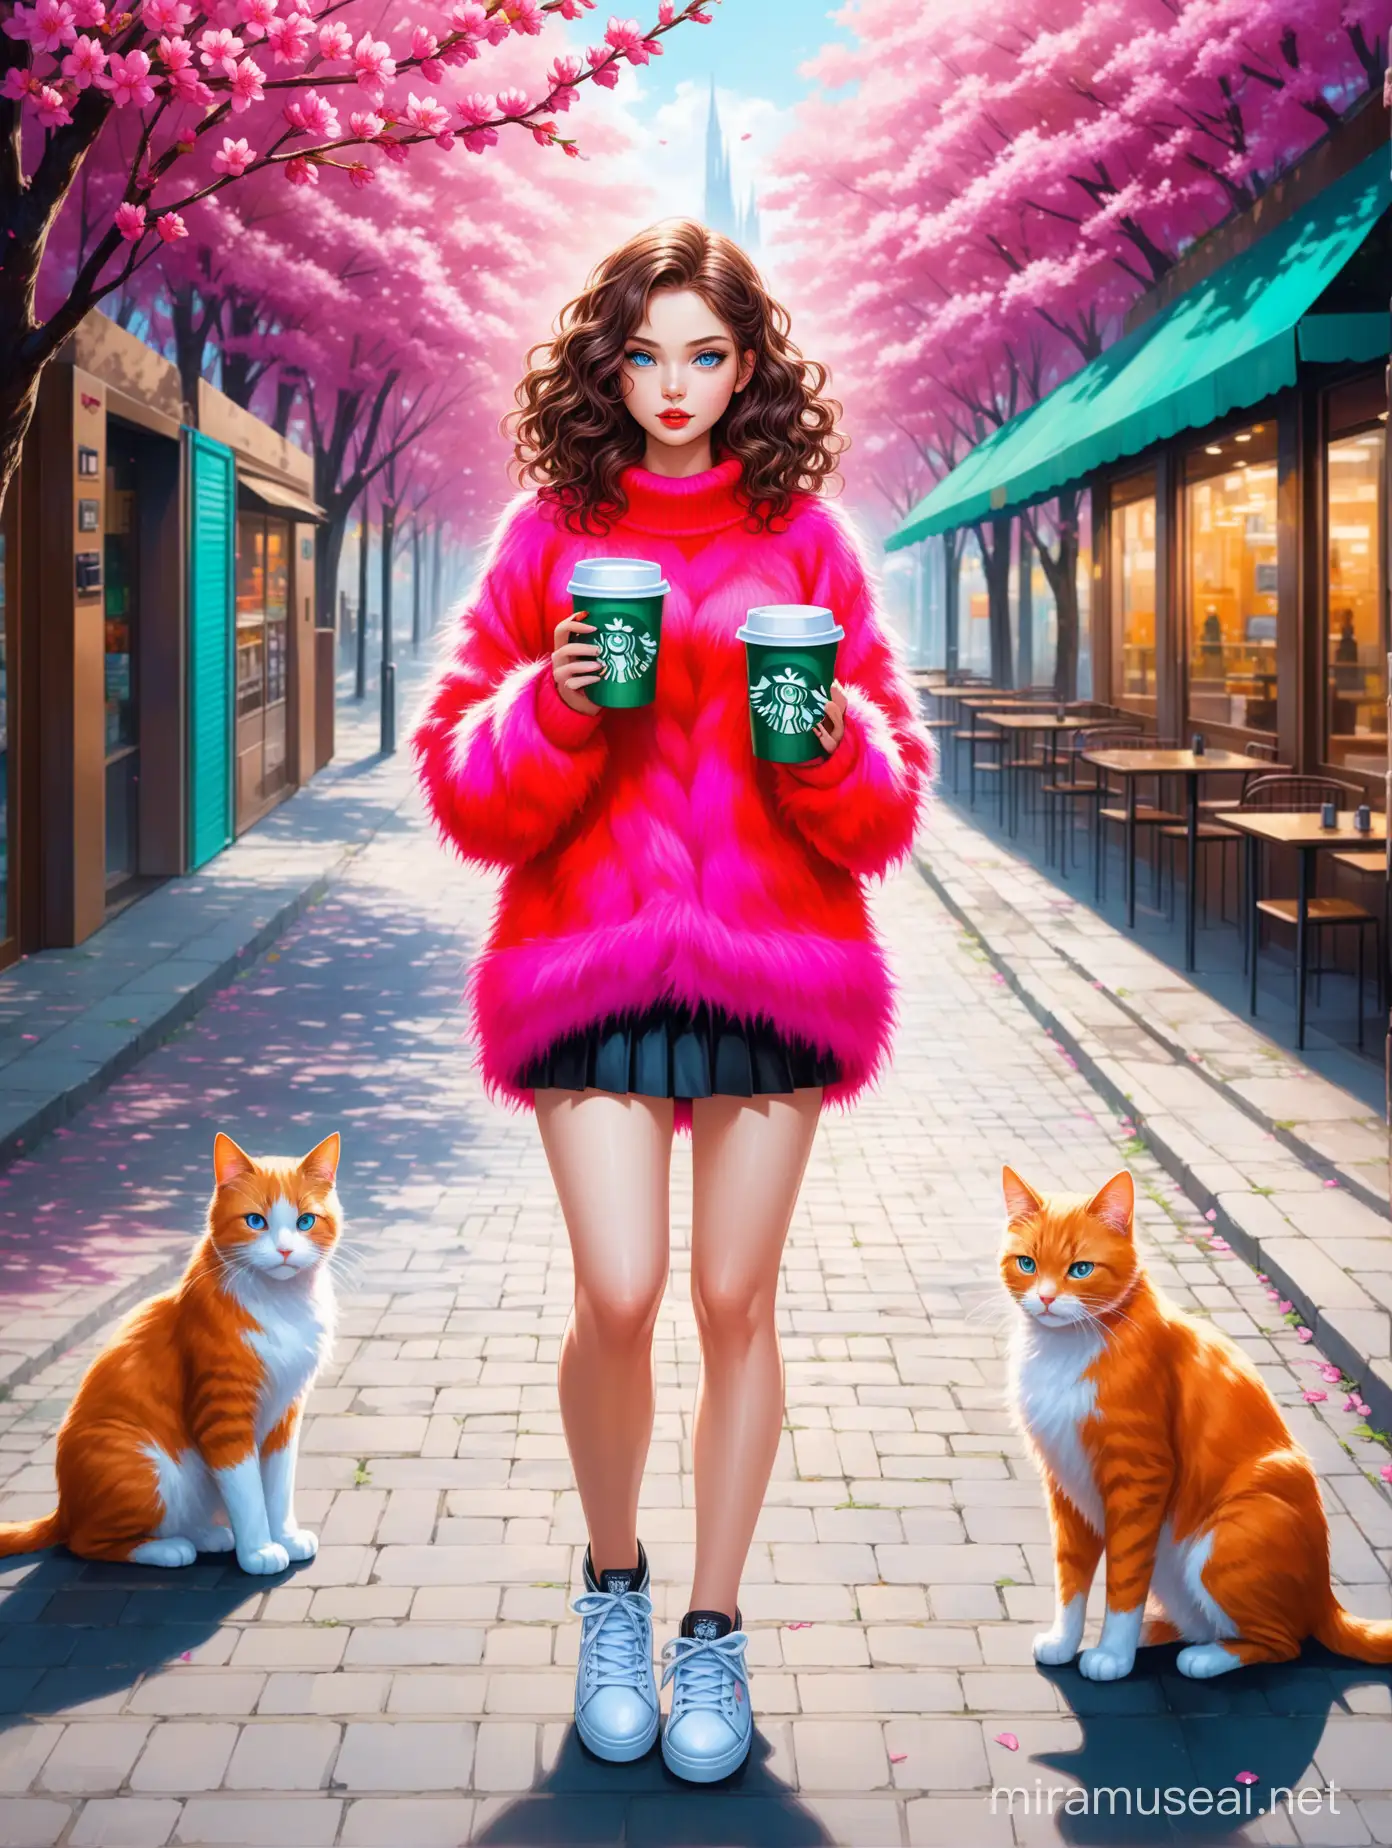 Expressive Urban Fashion Stunning Young Woman in Neon Colors with Starbucks Coffee